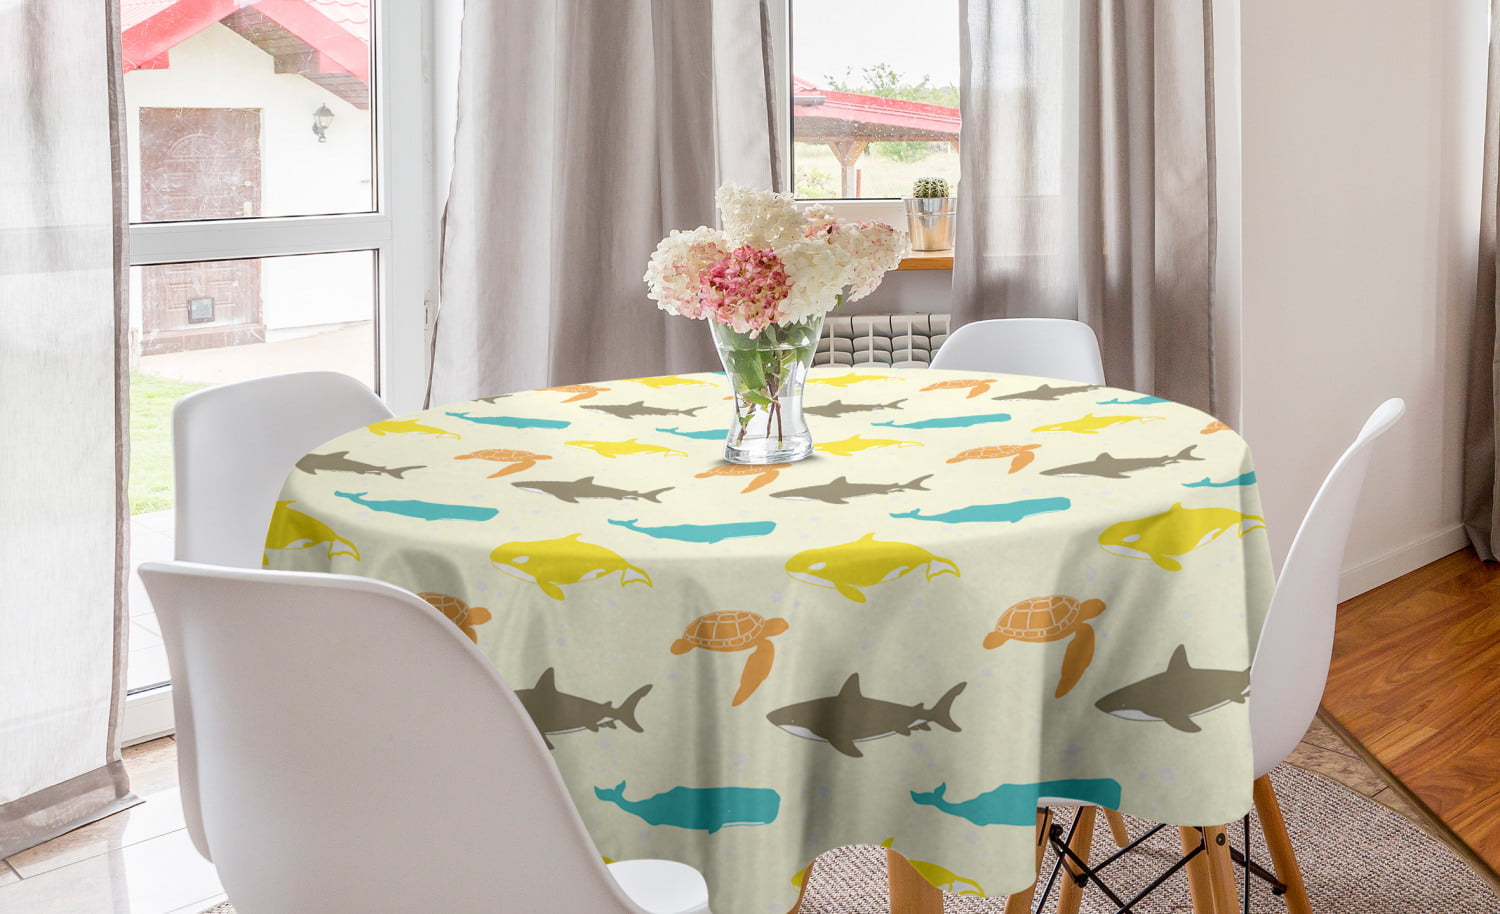 Details about   Turtle Beach Animal Ocean Sea Rectangle Tablecloth Chair Covers Dining Table Set 